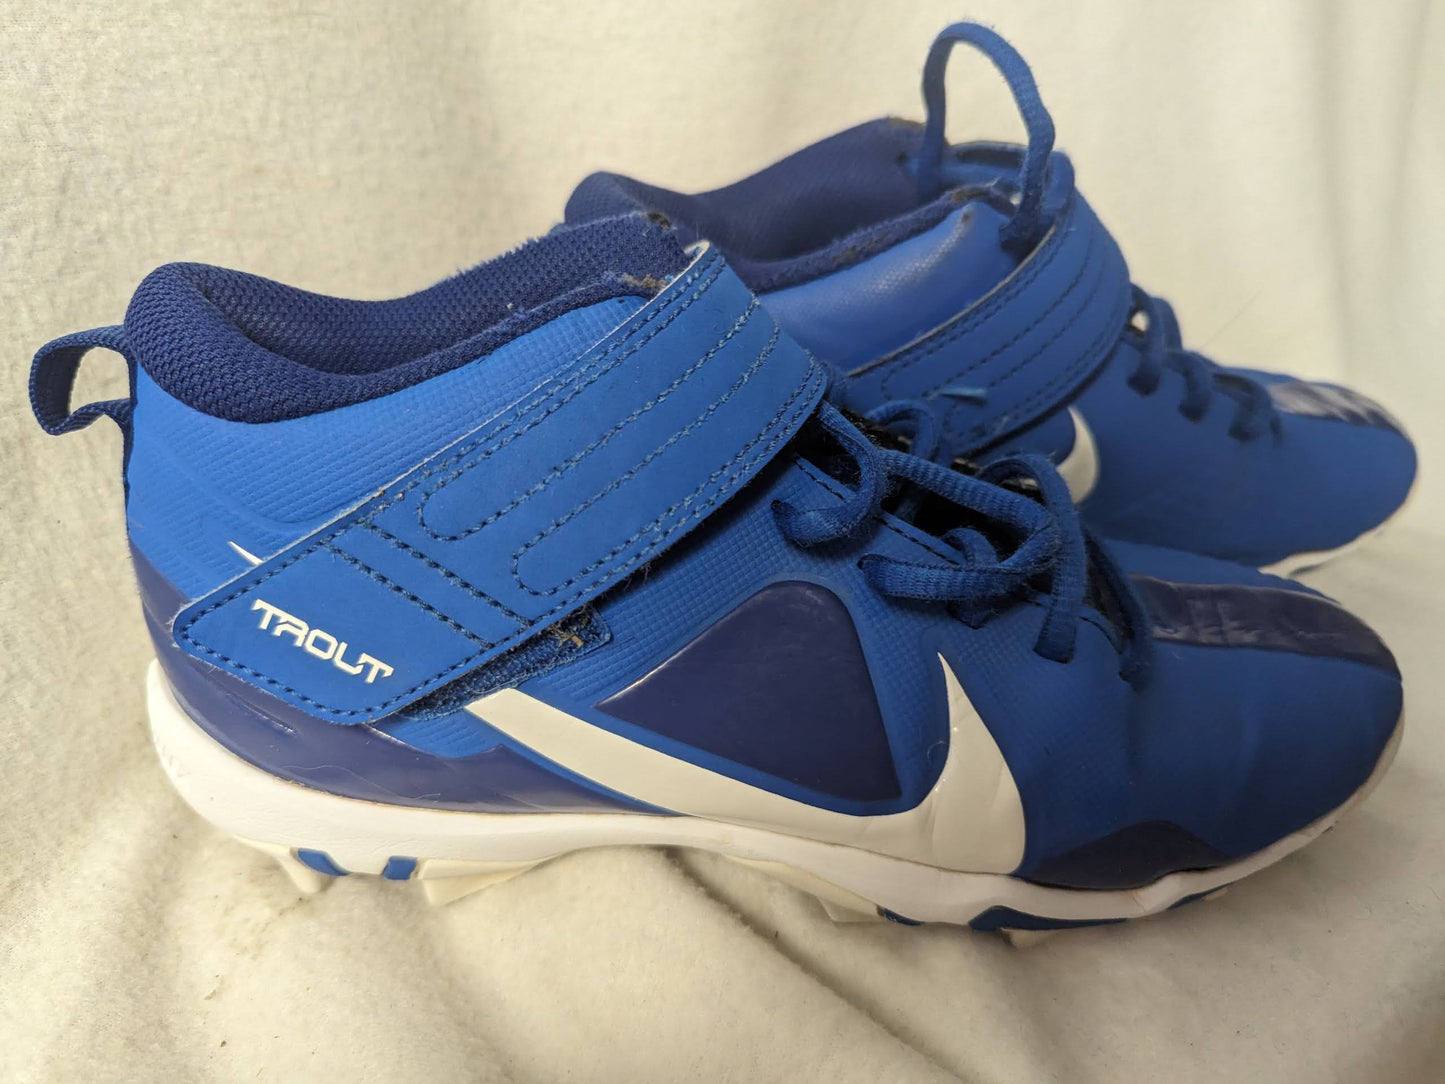 Nike Trout Cleats Size 5.5 Color Blue Condition Used